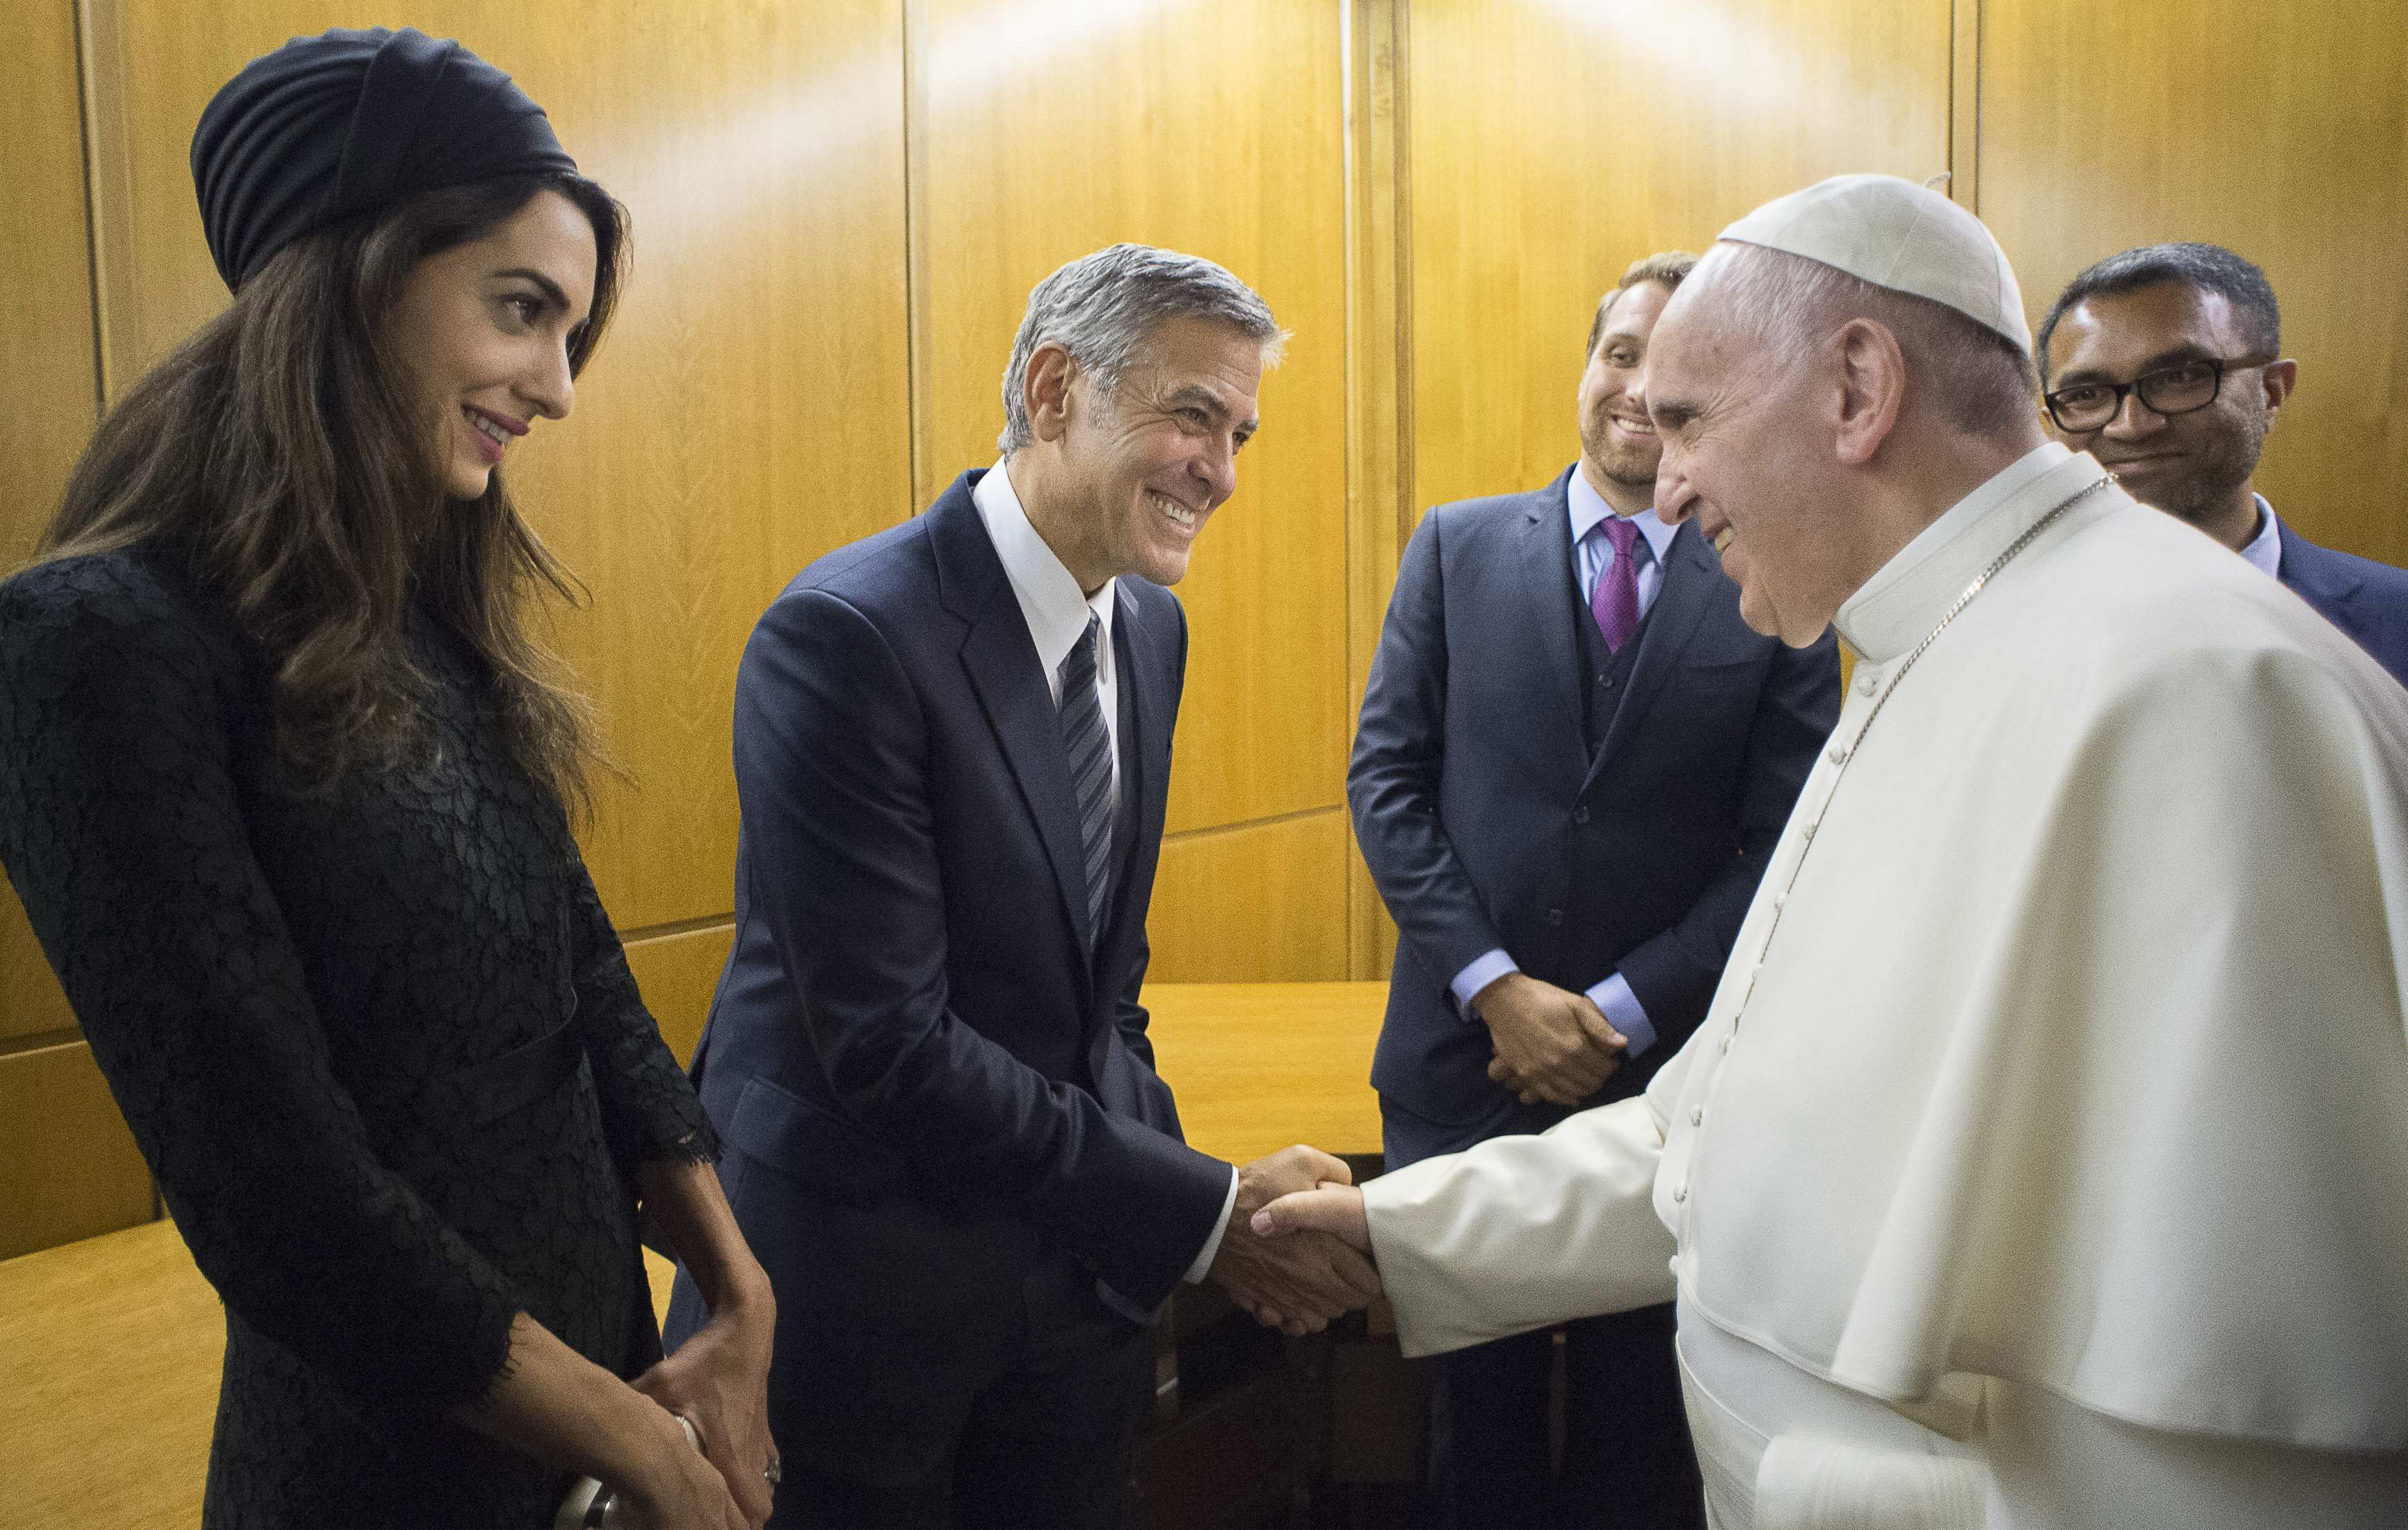 Pope Francis meets George Clooney and his wife Amal at the Vatican on May 29, 2016.